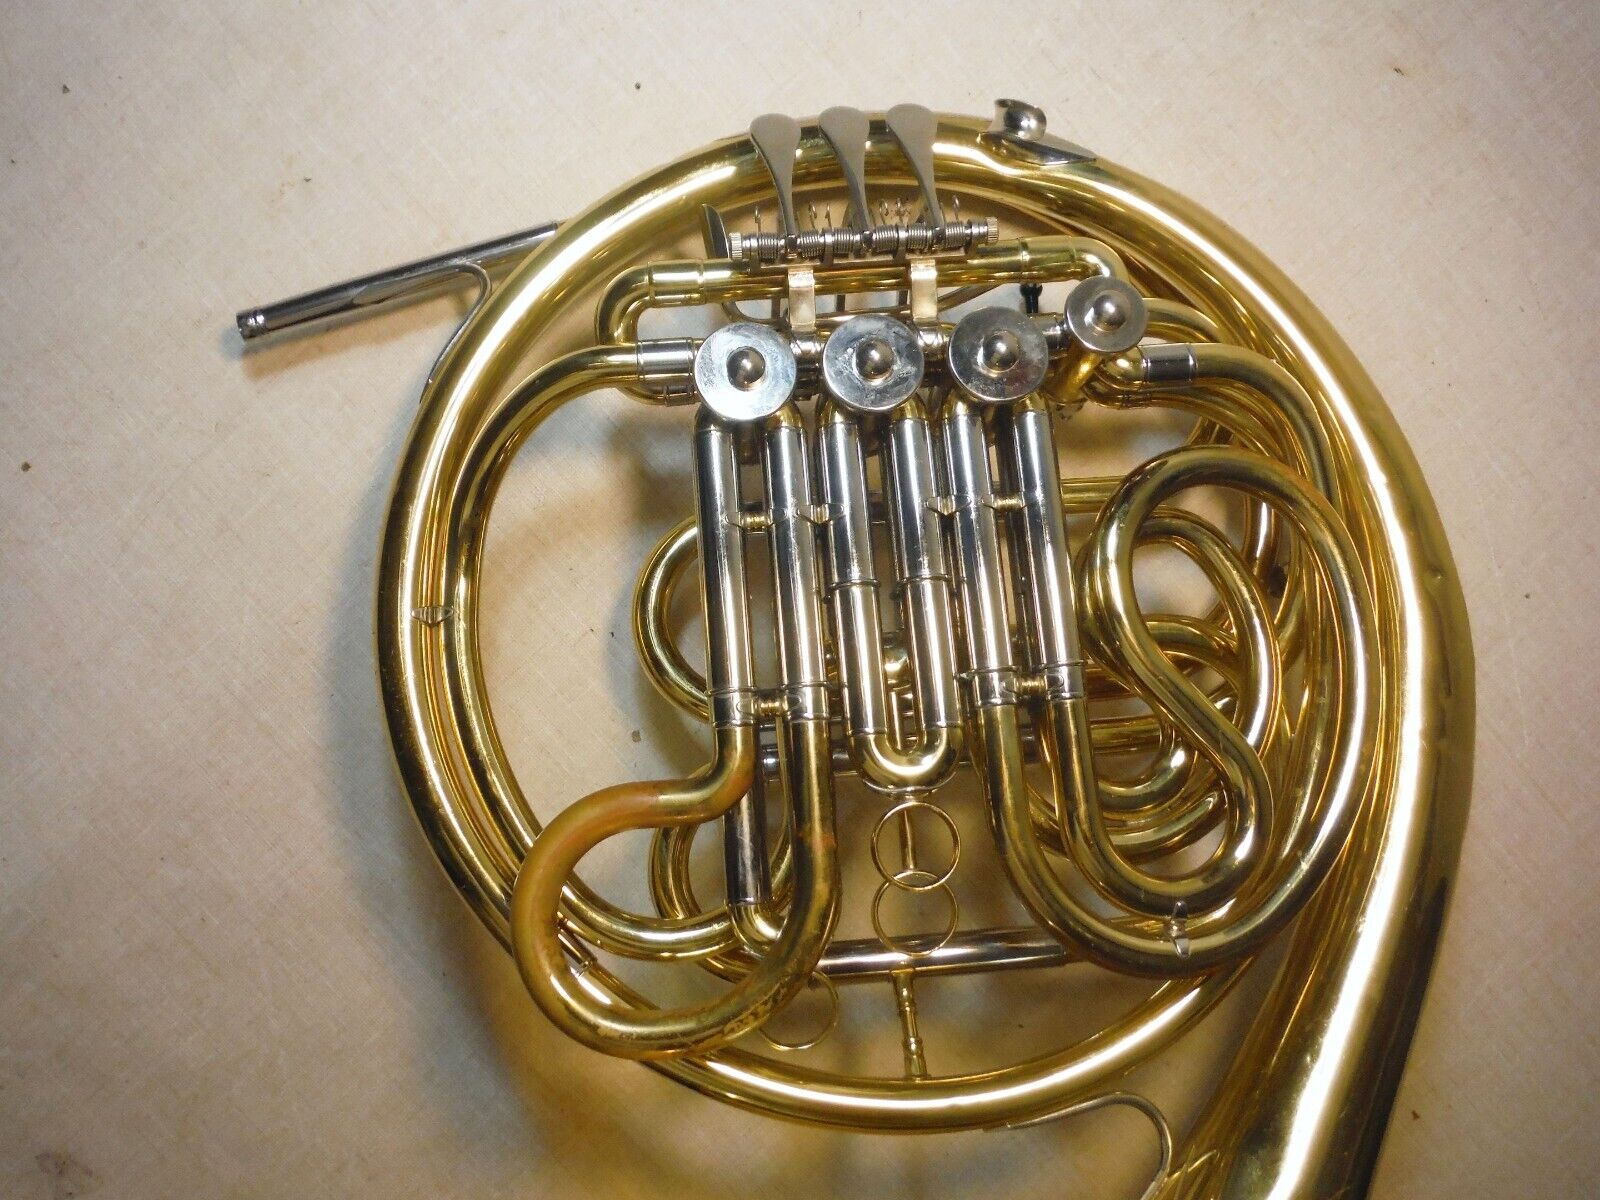 JUPITER JHR-852 DOUBLE FRENCH HORN BRASS WORKING GOOD W/DENTS CASE MOUTHPIECE 3